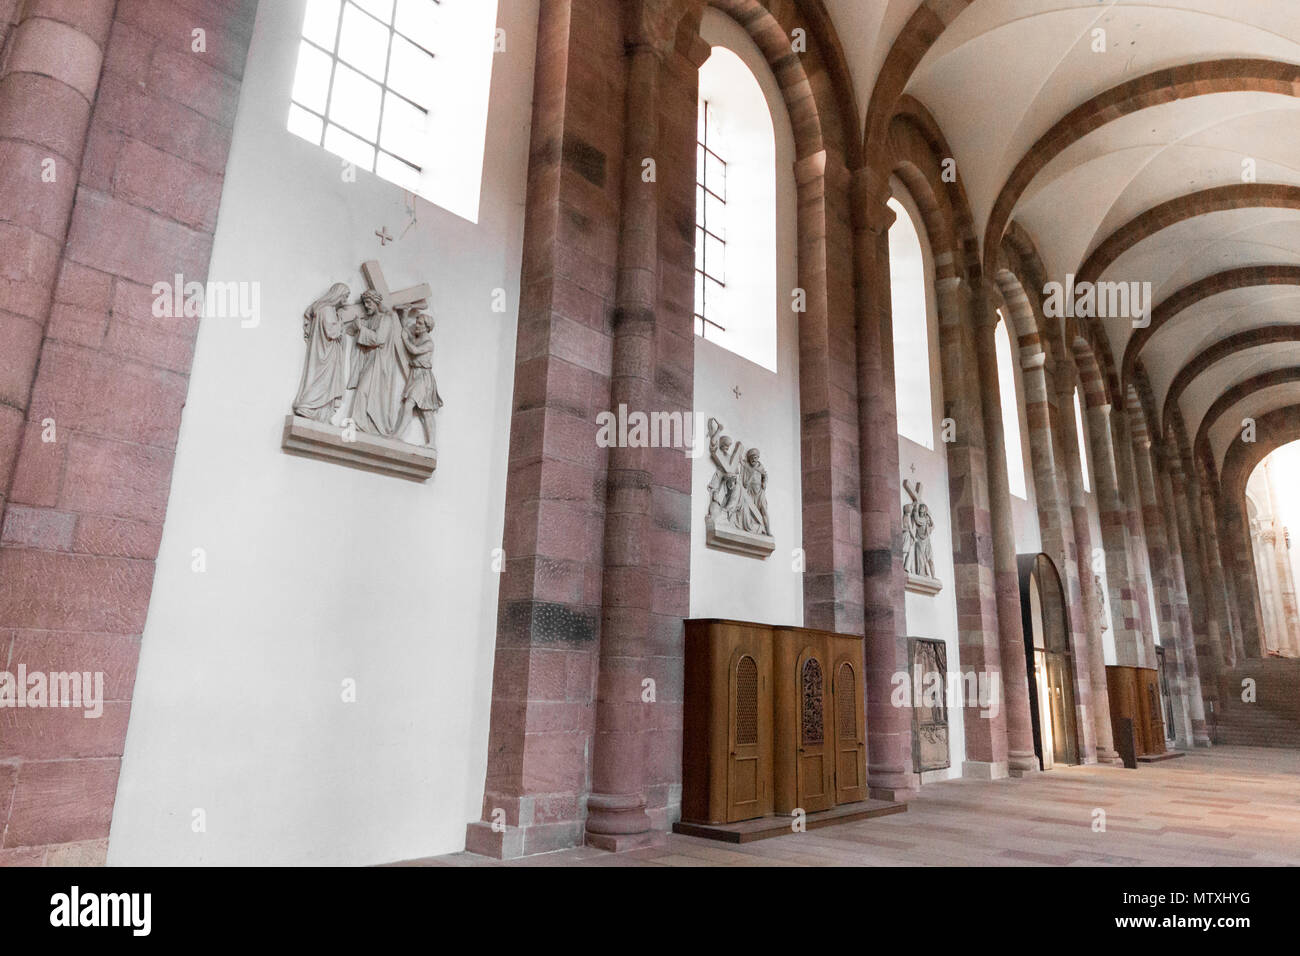 Speyer, Germany. Interior view of the Imperial Cathedral Basilica of the Assumption and Saint Stephen. A World Heritage Site since 1981 and largest ro Stock Photo